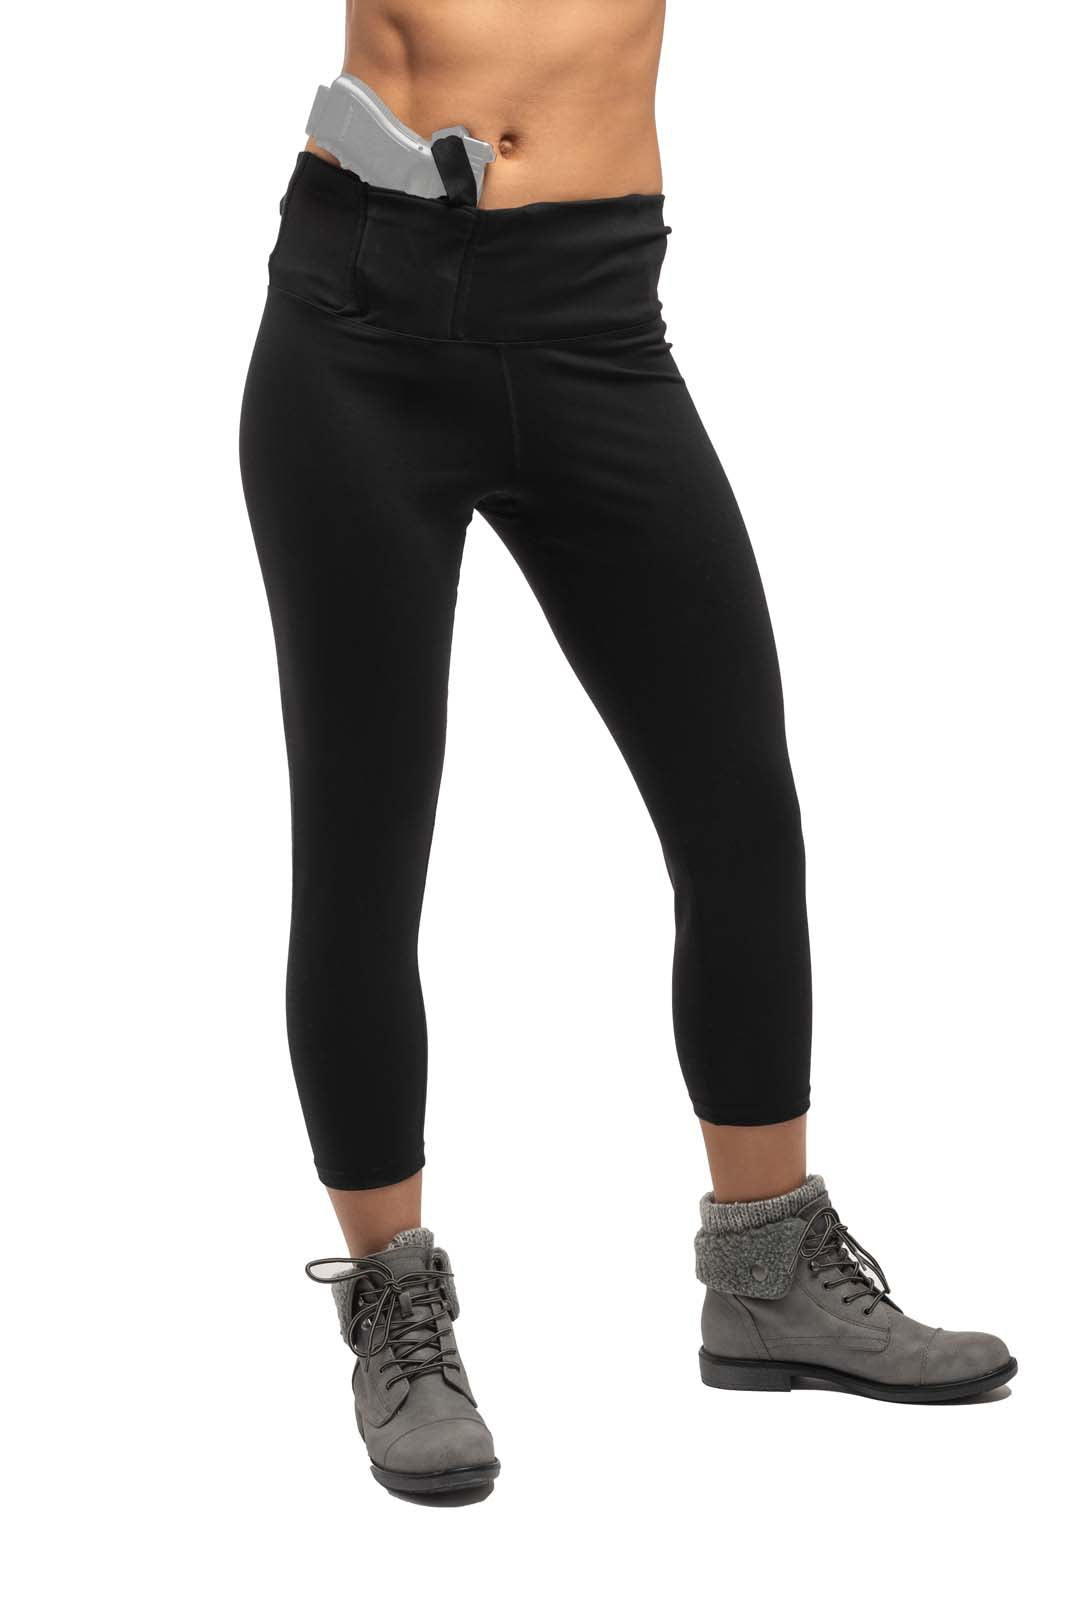 Women's Dual Holster Leggings - Concealed Carry Pants –